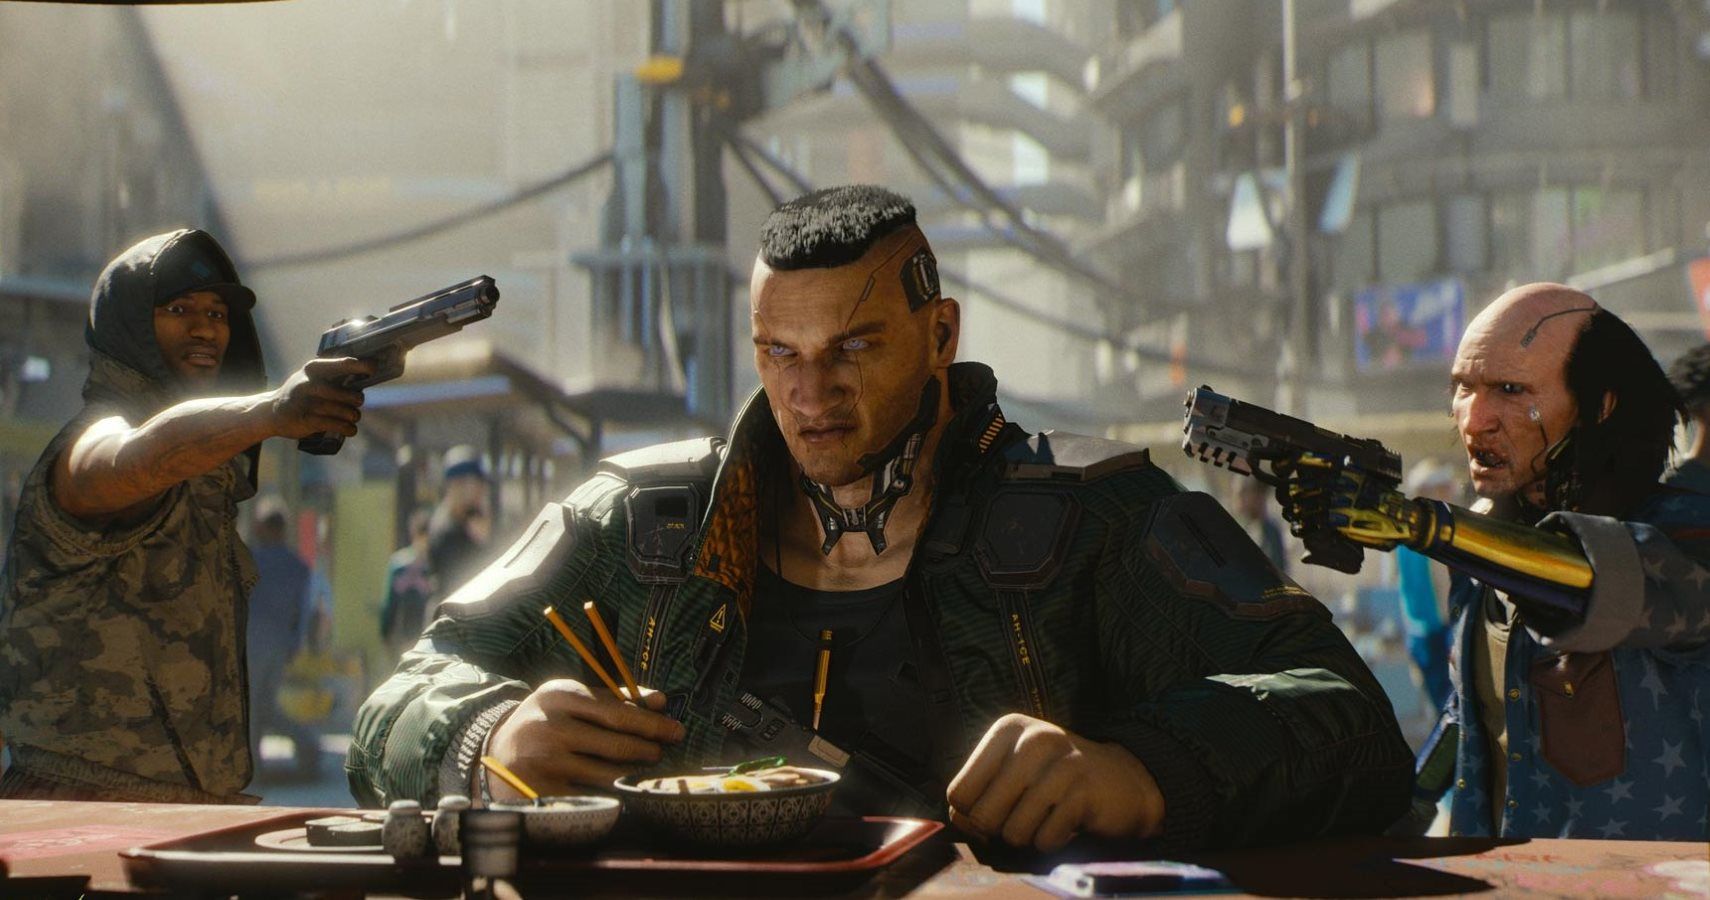 Rumor: Witcher 3 Director Is The Design Director For Cyberpunk 2077